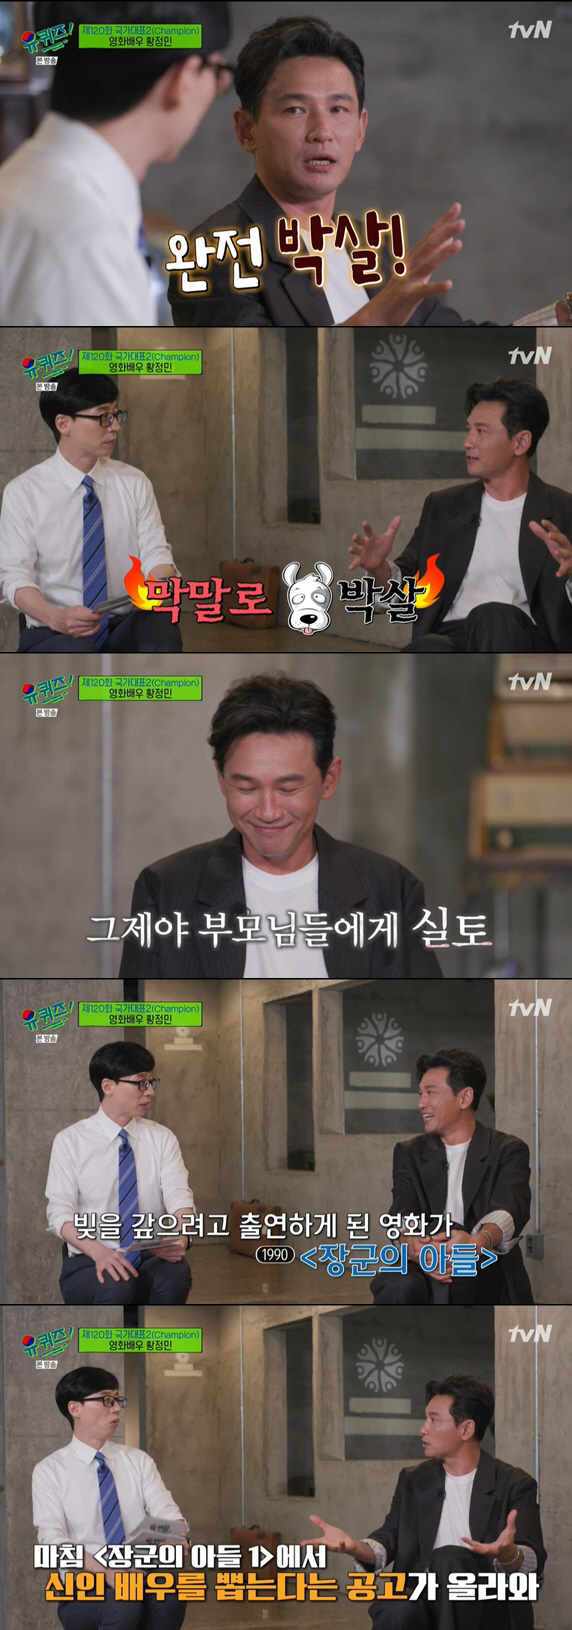 You Quiz on the Block Hwang Jung-min showed off his delightful dedication.Actor Hwang Jung-min appeared on TVN You Quiz on the Block broadcast on the 25th.Hwang Jung-min, the acting national representative who has 100 million cumulative audiences and all characters Hwang Jung-min, has been talking about the life story of Actor in the 28th year.Hwang Jung-min said, I watched Yu Quiz from the beginning.I am grateful for inviting me to my favorite pro, he said. I came to promote it anyway, but I told the public relations company that I would be the first to appear in You Quiz on the Block.The appearance of Hwang Jung-min will match the final puzzle of the friendship trip of Hwang Jung-min, Jo Seung-woo, Ji Jin-hee.Yoo Jae-Suk said, Thanks to your courage, all three captains appeared.I did not intend to, but it became my own big picture.  Did you see Ji Jin-hee and Jo Seung-woo? I saw it, said Hwang Jung-min, laughing. I was embarrassed because my friends came out. Besides, the picture continued to come out.This is really funny, said Yoo Jae-Suk, who saw the picture again.It is a trip of the steamers, he said, and Hwang Jung-min explained, I did not know it was really taking. Yoo Jae-Suk said, This photo is about the illumination of the room, the bottle of beverages placed in front of it, the kimchi pan and the pot that I ate next to it. Hwang Jung-min said, Lets eat the first and then boil it and add a drink to it.Jo Seung-woo and Ji Jin-hee did not eat, so I did a trick. Then, when Yoo Jae-Suk asked, What was it like when the pictures were walking around in a row? Hwang Jung-min said, I was so embarrassed, I thought it was crazy. No, what is this all of a sudden?I thought, why did people follow this and why did not I understand it?Hwang Jung-min said, Since Ji Jin-hee appeared on You Quiz on the Block, why do not people come to You Quiz on the Block?I asked him, he said, what would you have done if you did not travel?The travel expenses were shared at the time, but the most popular Ji Jin-hee paid a little more; Hwang Jung-min said of Ji Jin-hee, I still do not know.When I know, I have a side that I want to know what is she? Also released was a photo taken with Actor Jeon Do-yeon on the day, with Hwang Jung-min saying, I had dinner with Jeon Do-yeon because of the timing.Jeon Do-yeon bought rice and laughed brightly. If you go on a second trip with Hwang, Jo, Ji, where would you go? I want to go anywhere near.But can I play with a little joke like that? I think that everyone is famous and I can play comfortably.On the same day, Hwang Jung-min gave a heartfelt affection and affection for acting, such as the background of having Actors dream, an anecdote that set up a theater during high school, the story of the first cast in the movie, and the detailed character analysis method that made the current national representative class Actor Hwang Jung-min.In particular, Hwang Jung-min caught the eye by telling the story of a 20 million won debt after setting up a theater company during high school days. At that time, passion and passion remained.I gave up my academic exams without my parents knowing, and I prepared for the performance, but I was smashed. Who would come to see high school students do it? Hwang Jung-min appeared in the film The Generals Son to pay off the debt; he said, I passed after the third audition, but I did too much NG.Finally, Hwang Jung-min said, I seem to be growing steadily. When I was young, I wanted to play a role well and I was self-defeating.I let myself go more because I wanted to be in trouble.I am a little bit acknowledging me and now I am acting while enjoying it.  I want to be an actor who wants to see the work and just be expected by the name Hwang Jung-min. 